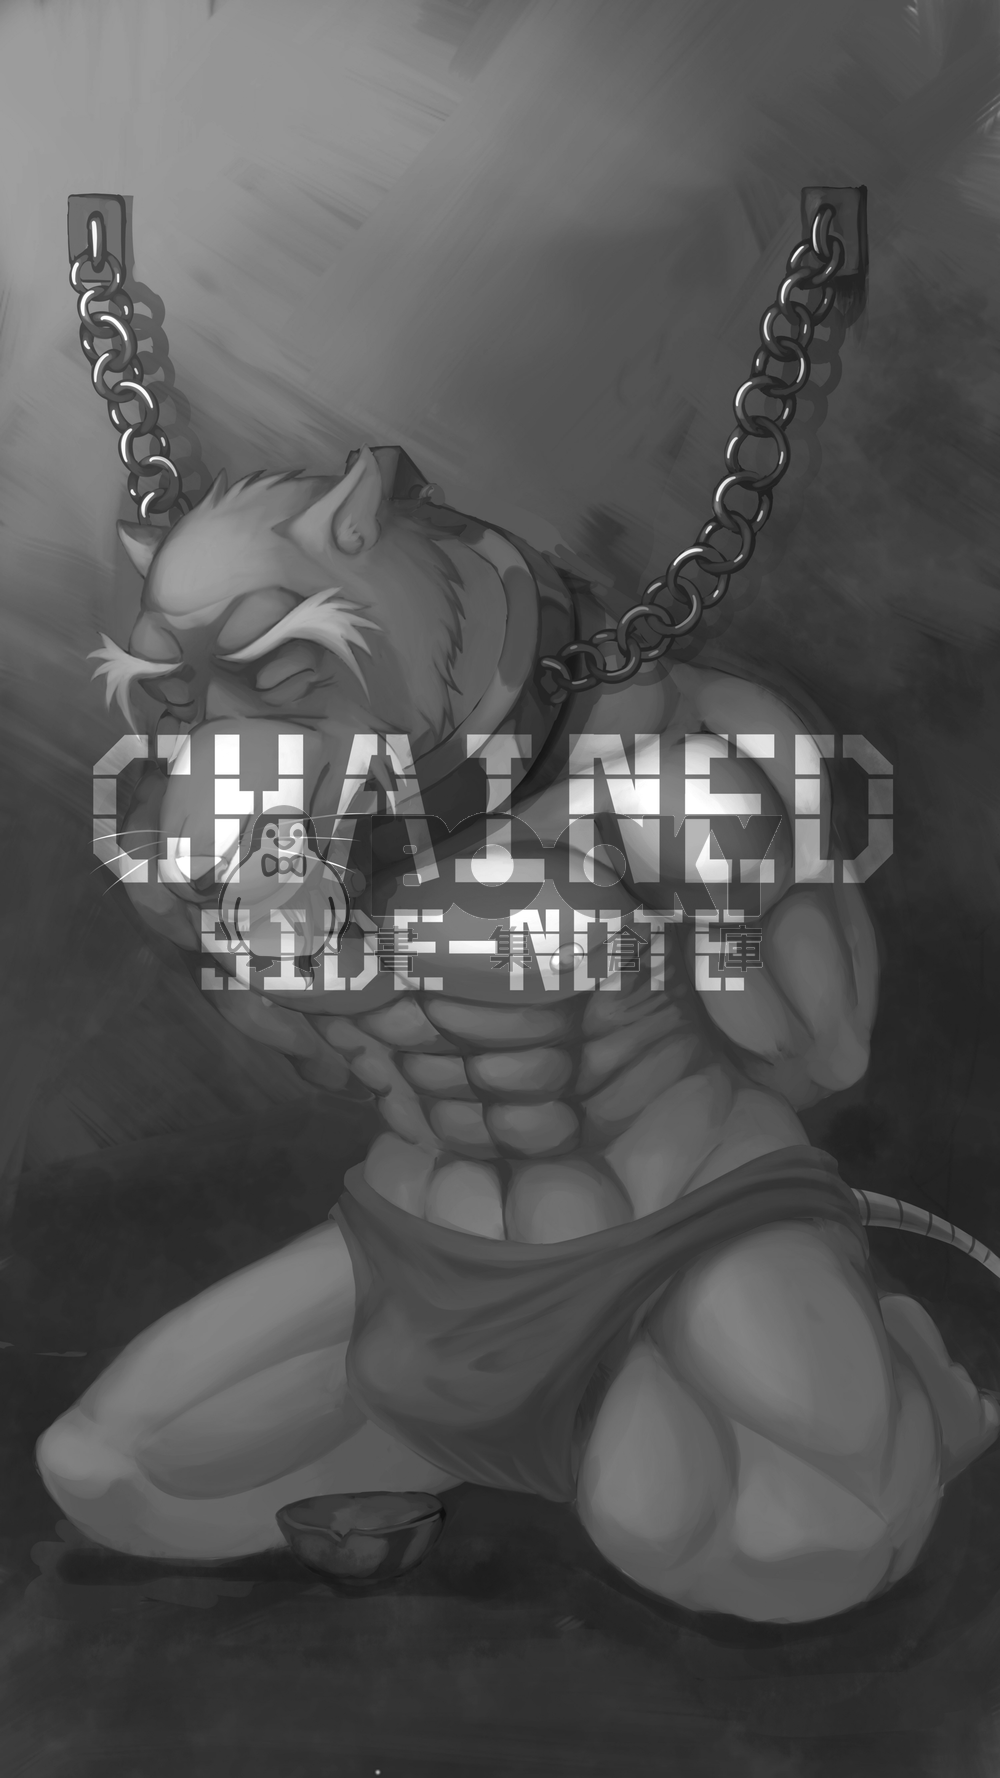 Chained side-note 試閱圖片